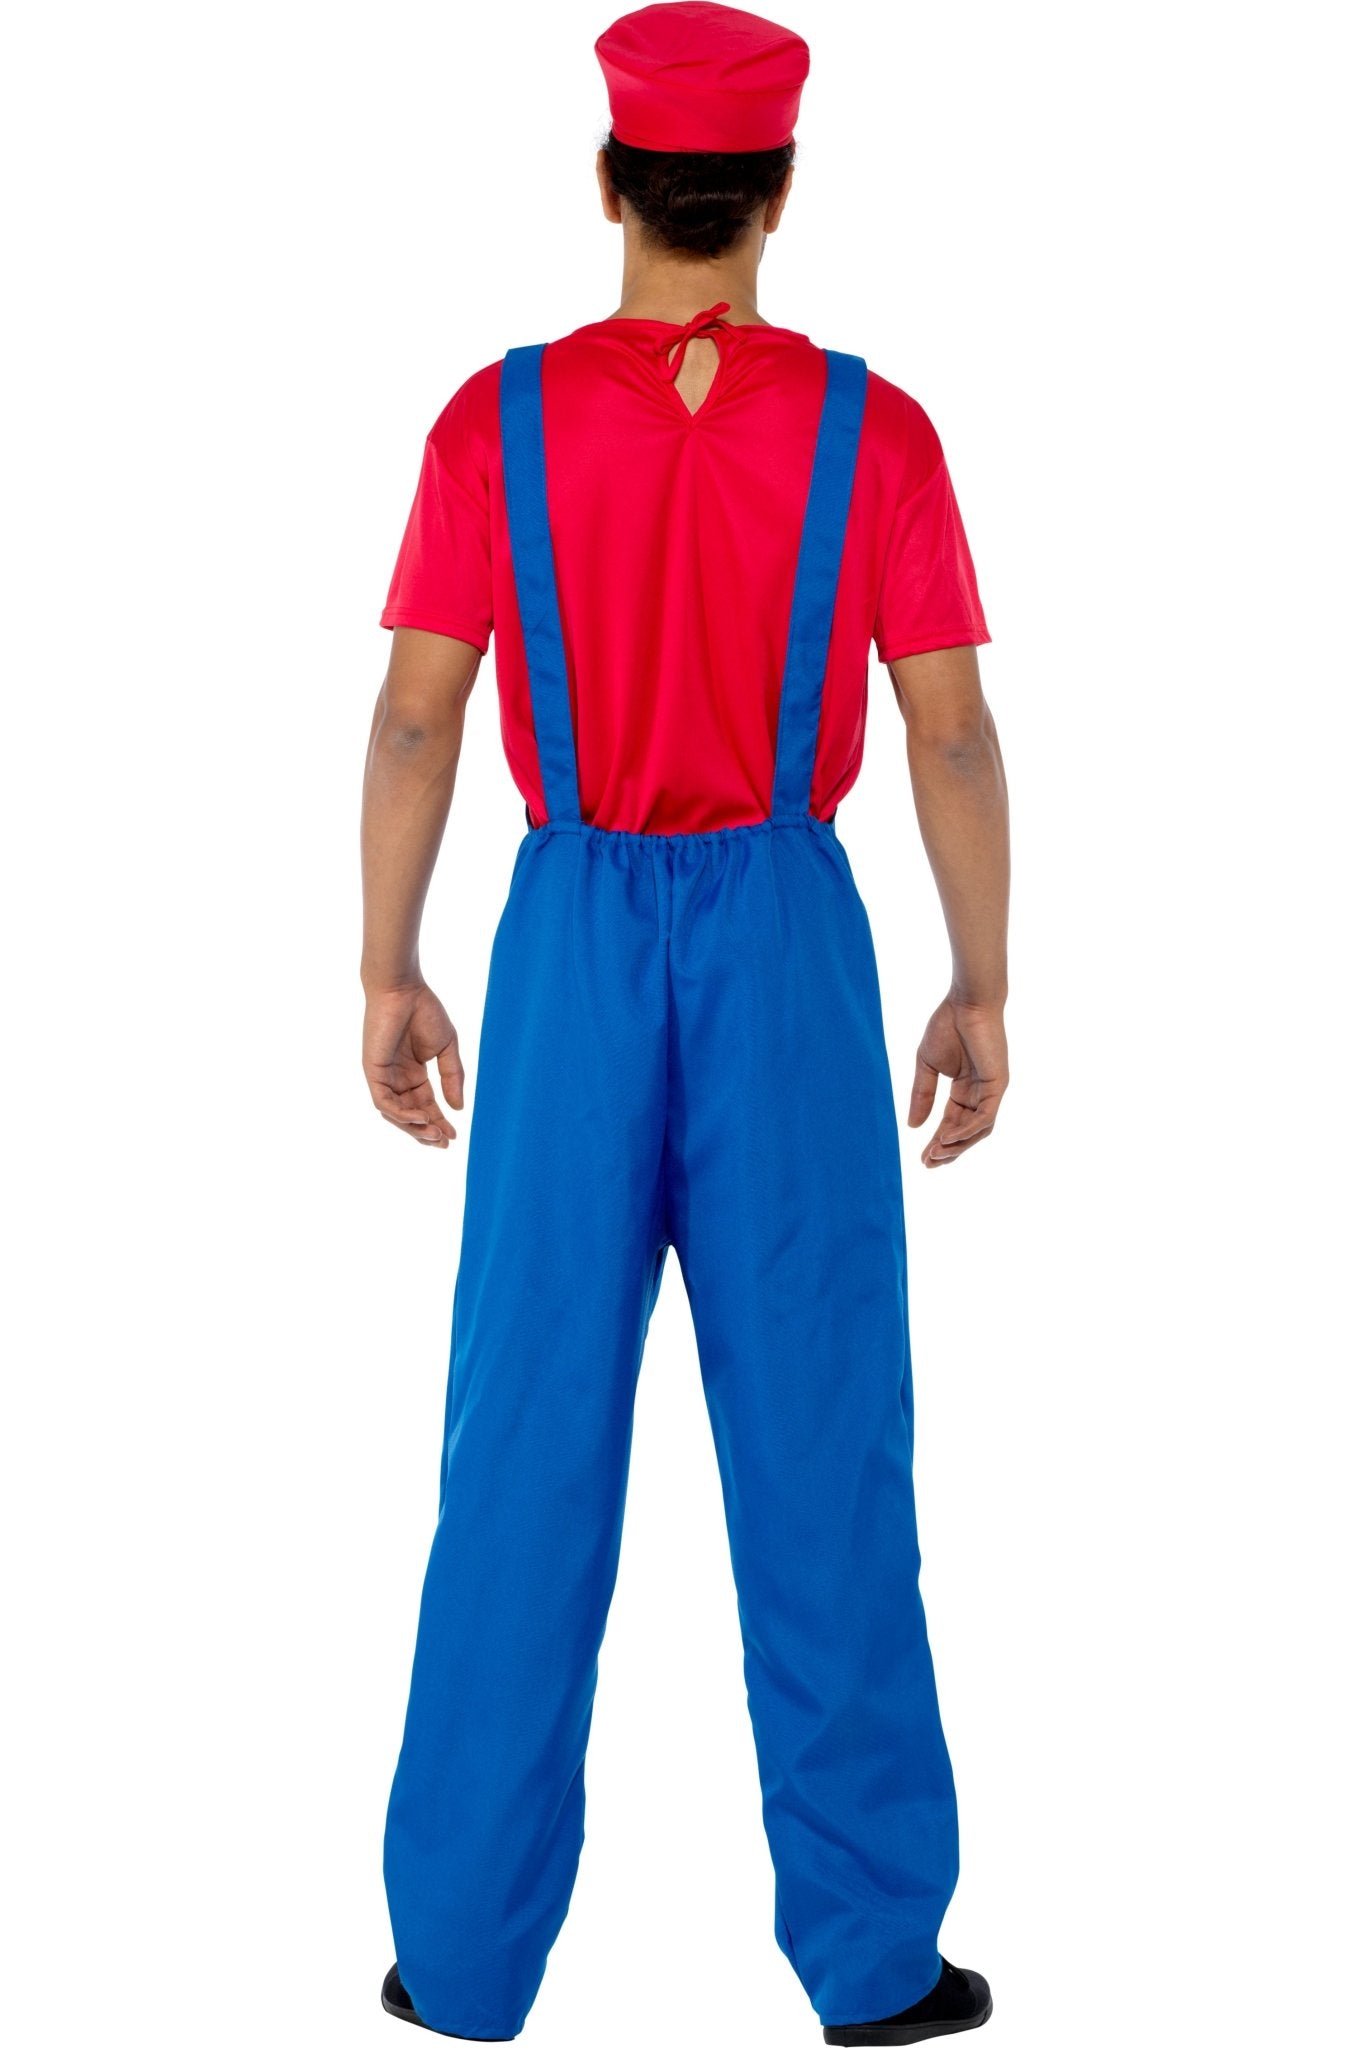 Red Plumber Guy Costume - Party Australia